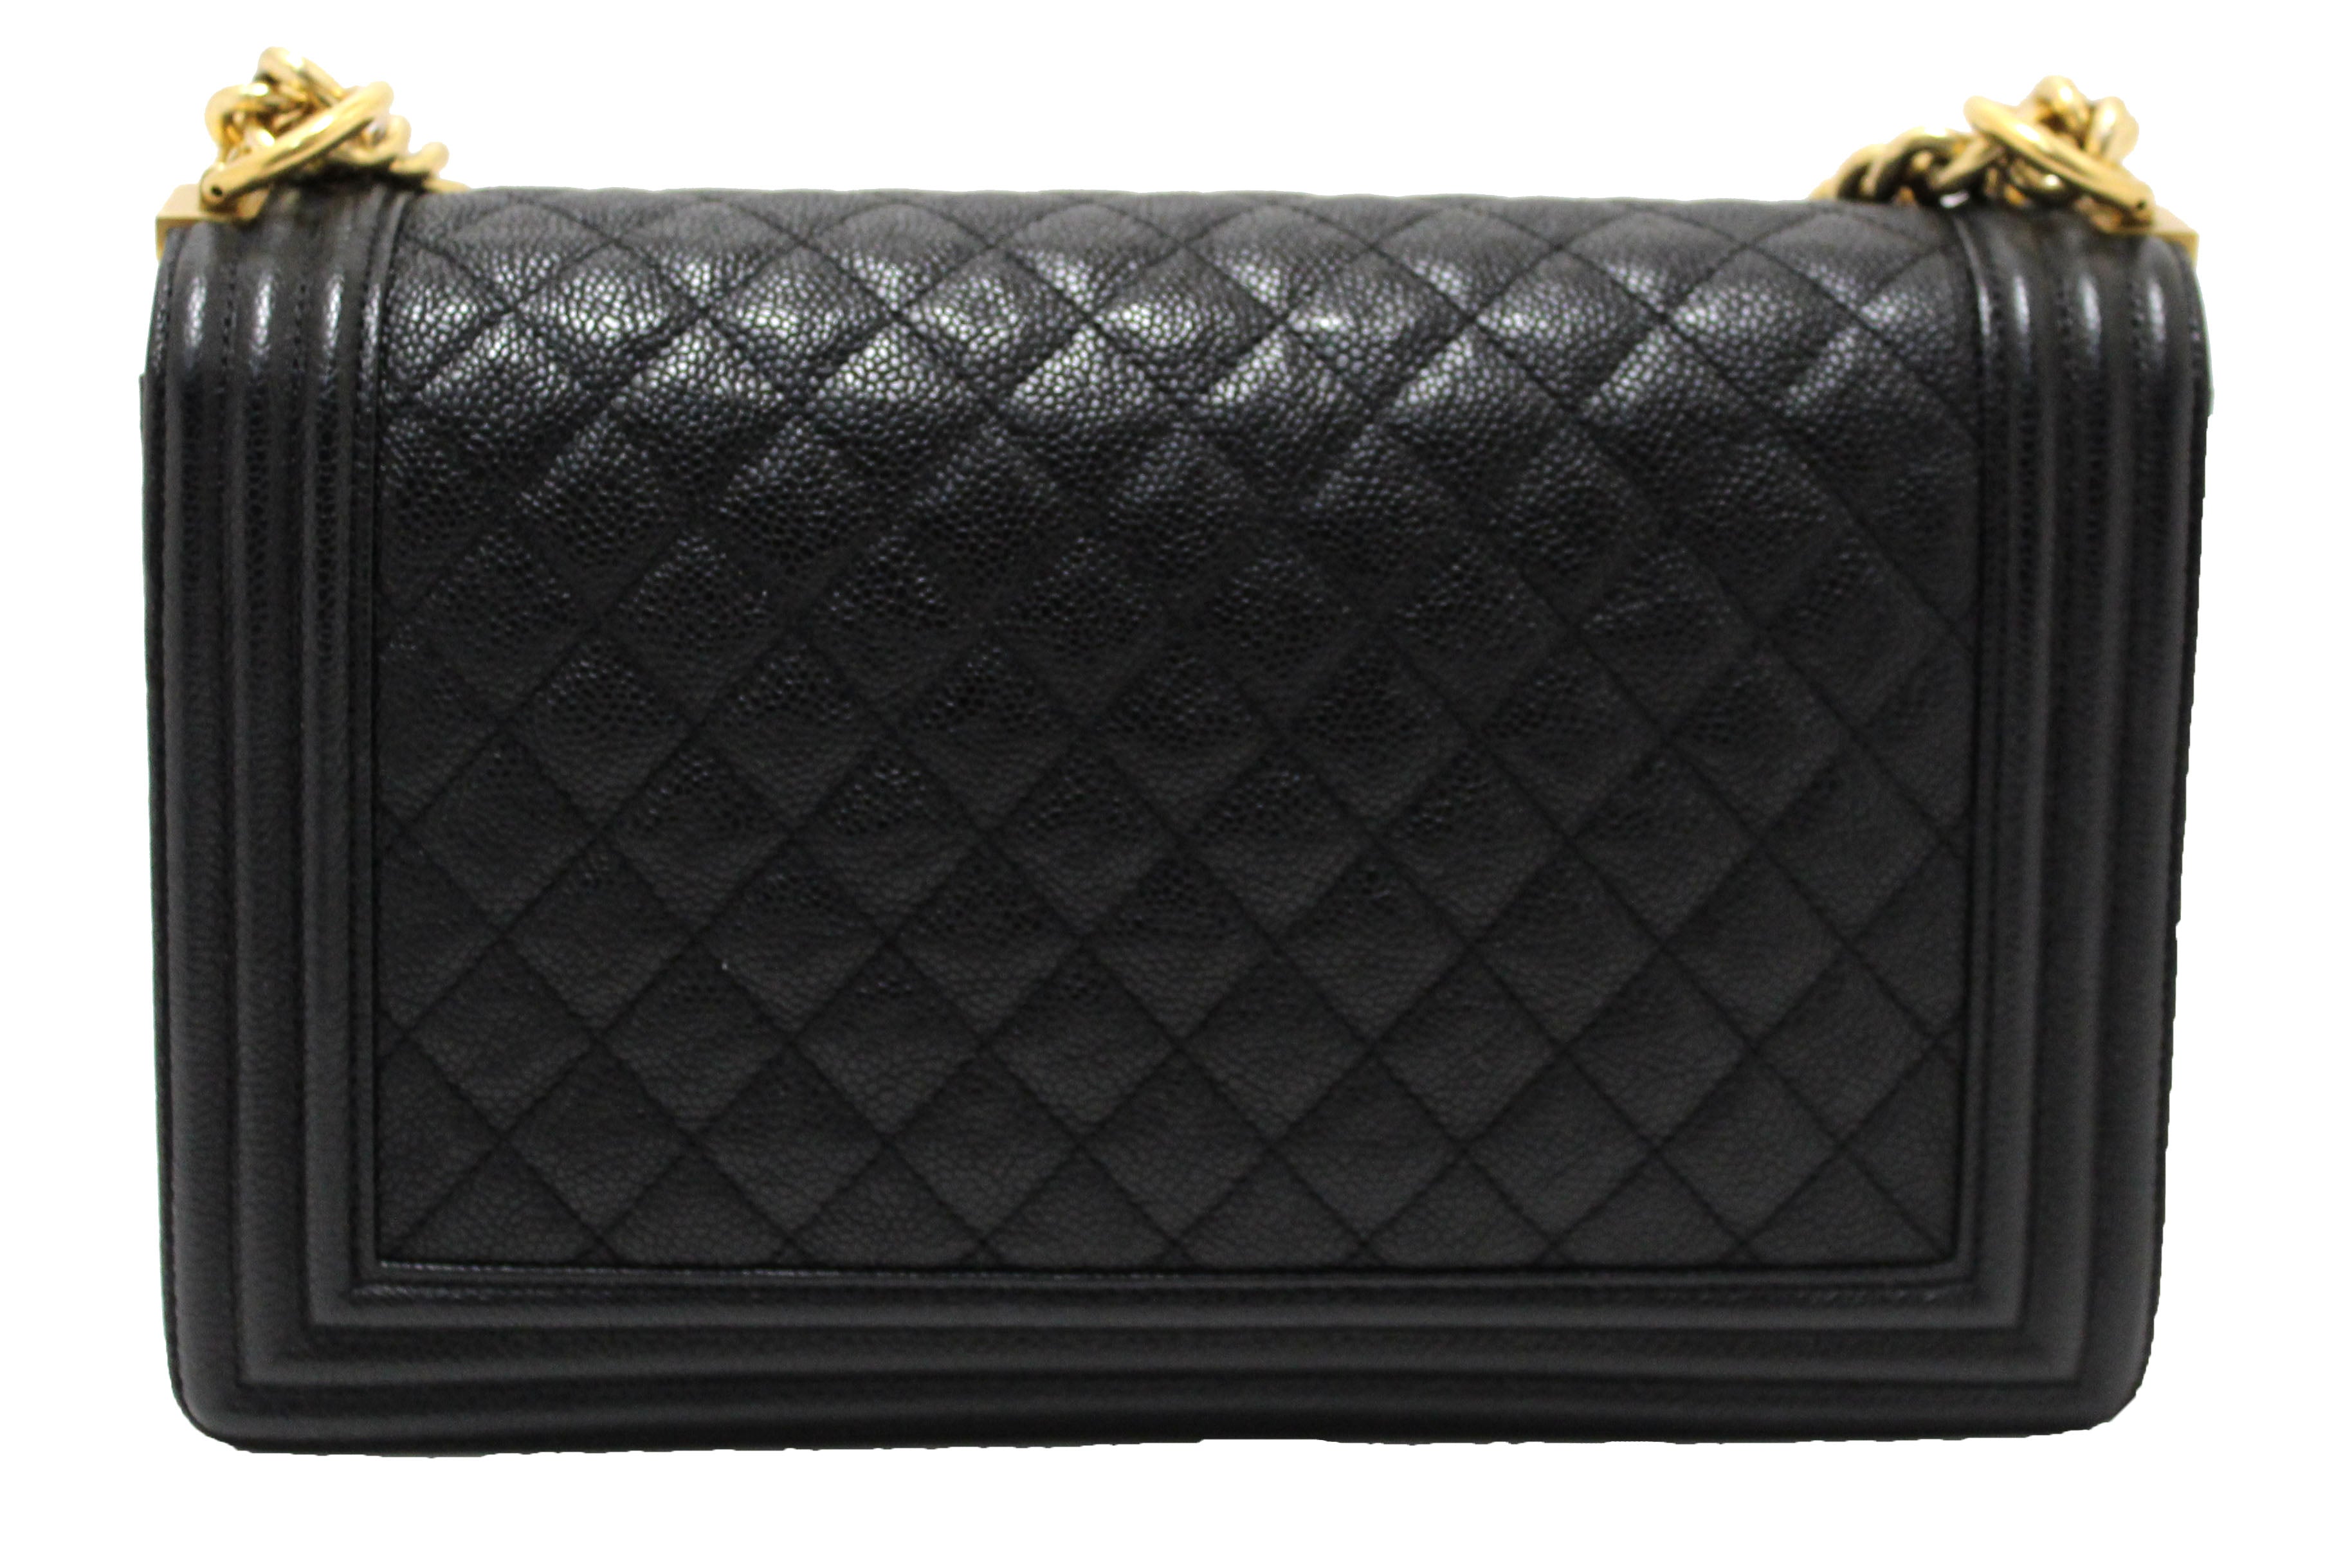 Authentic Chanel Black Quilted Caviar Leather New Medium Boy Shoulder Bag